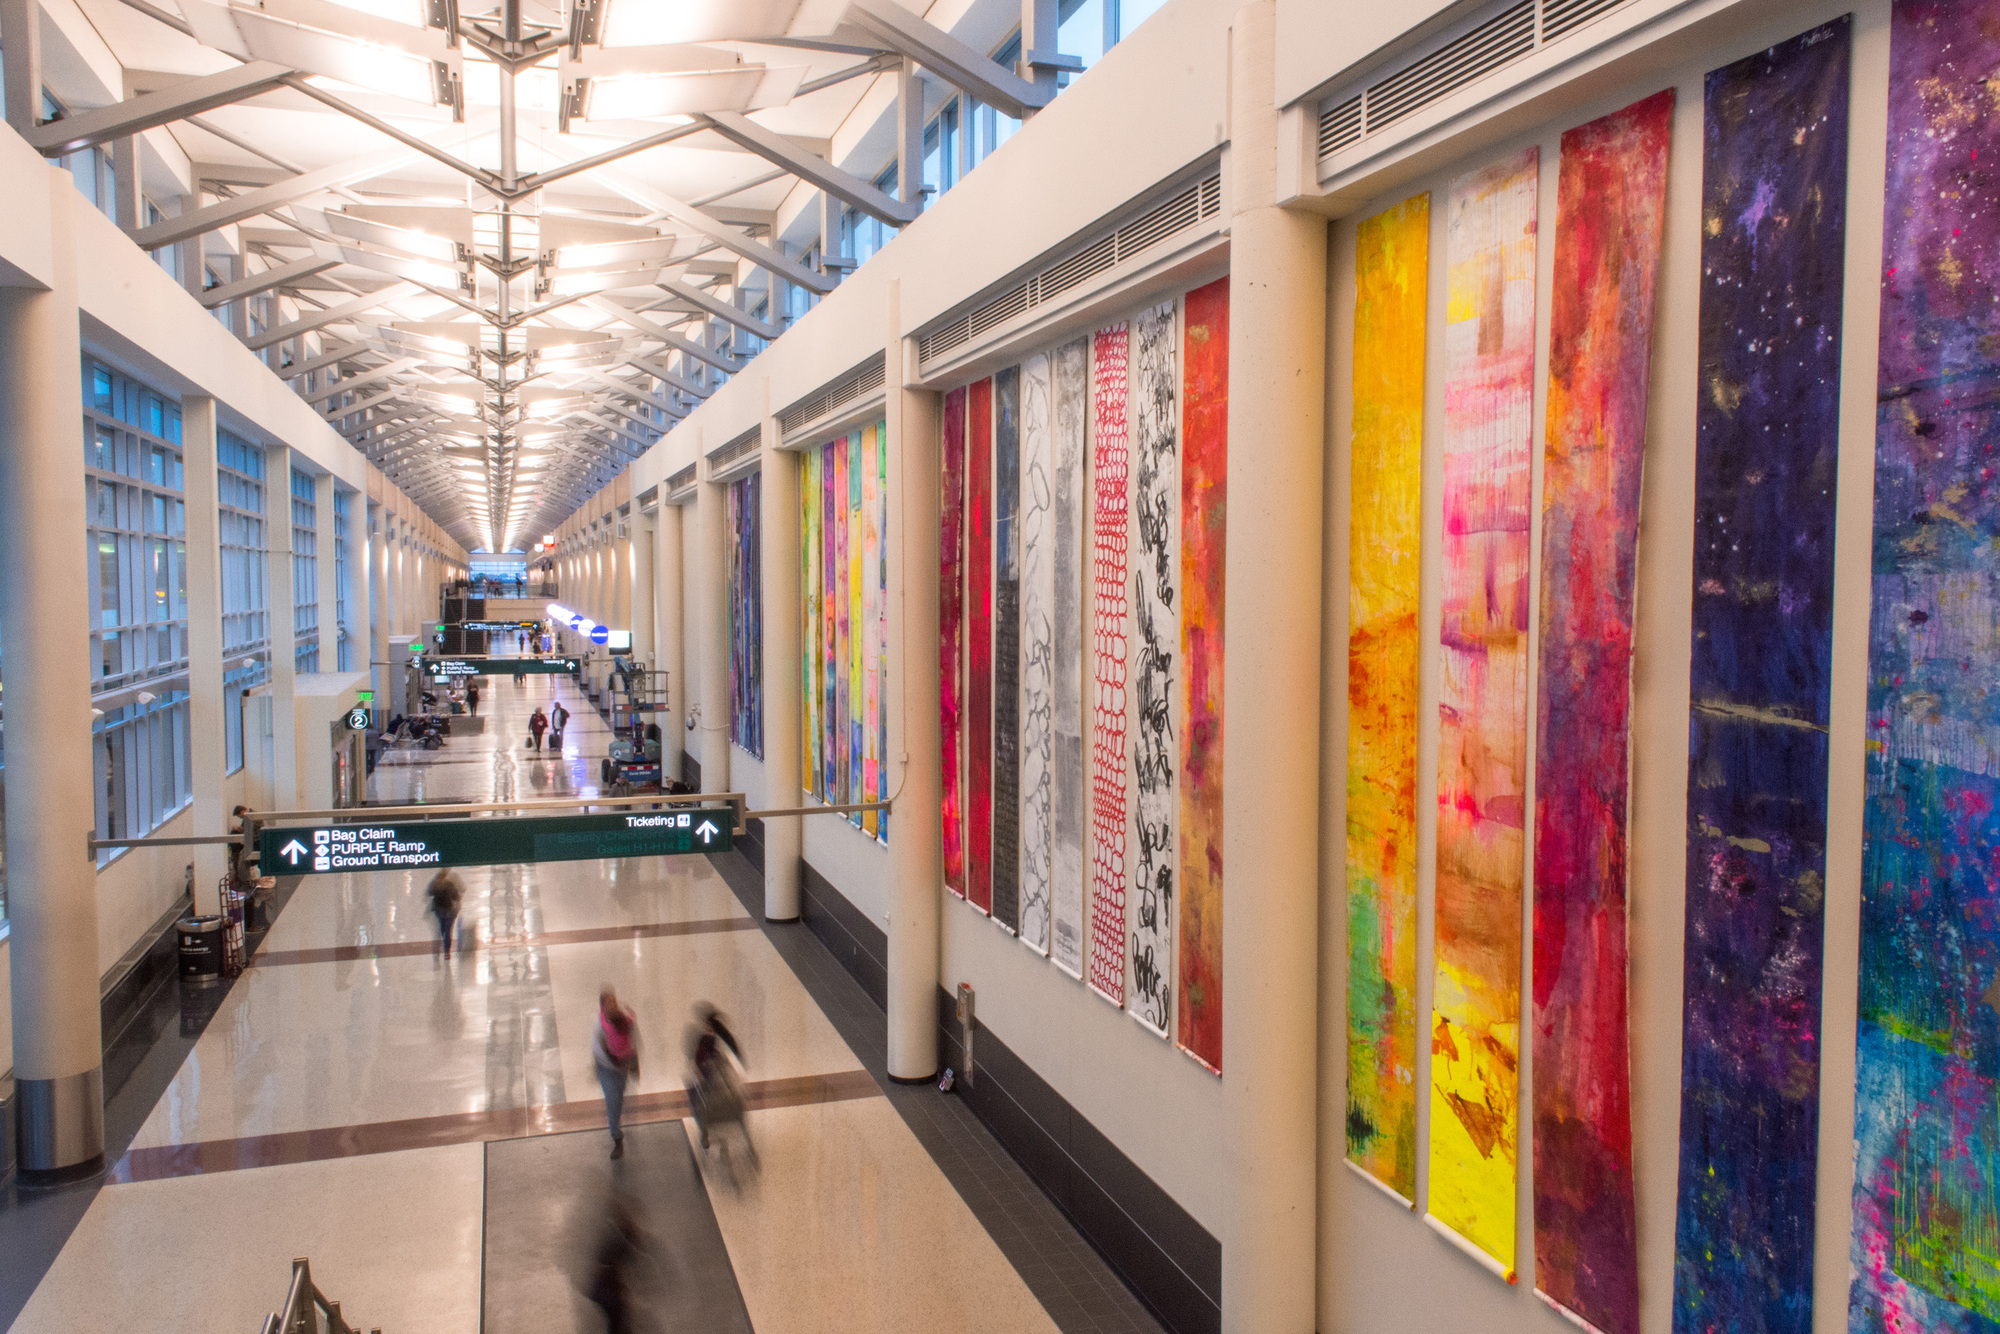 Scrolls from “122 Conversations,” by Anne Labovitz, greet passengers at the entrance to Terminal 2.